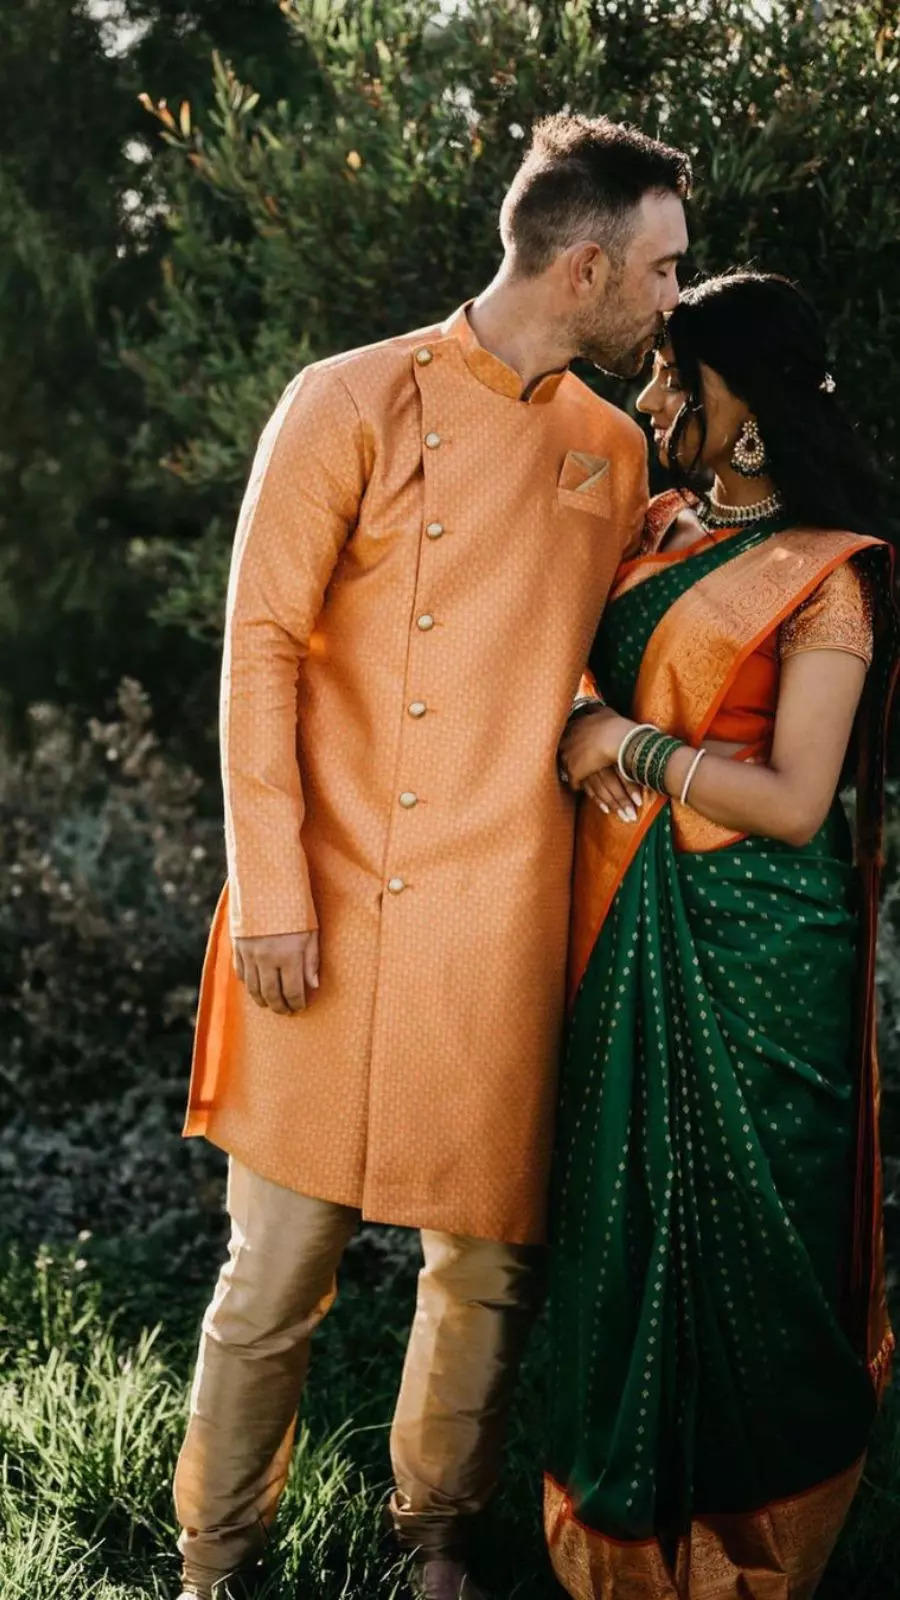 Tips To Buy Haldi Dresses Under A Budget For Weddings